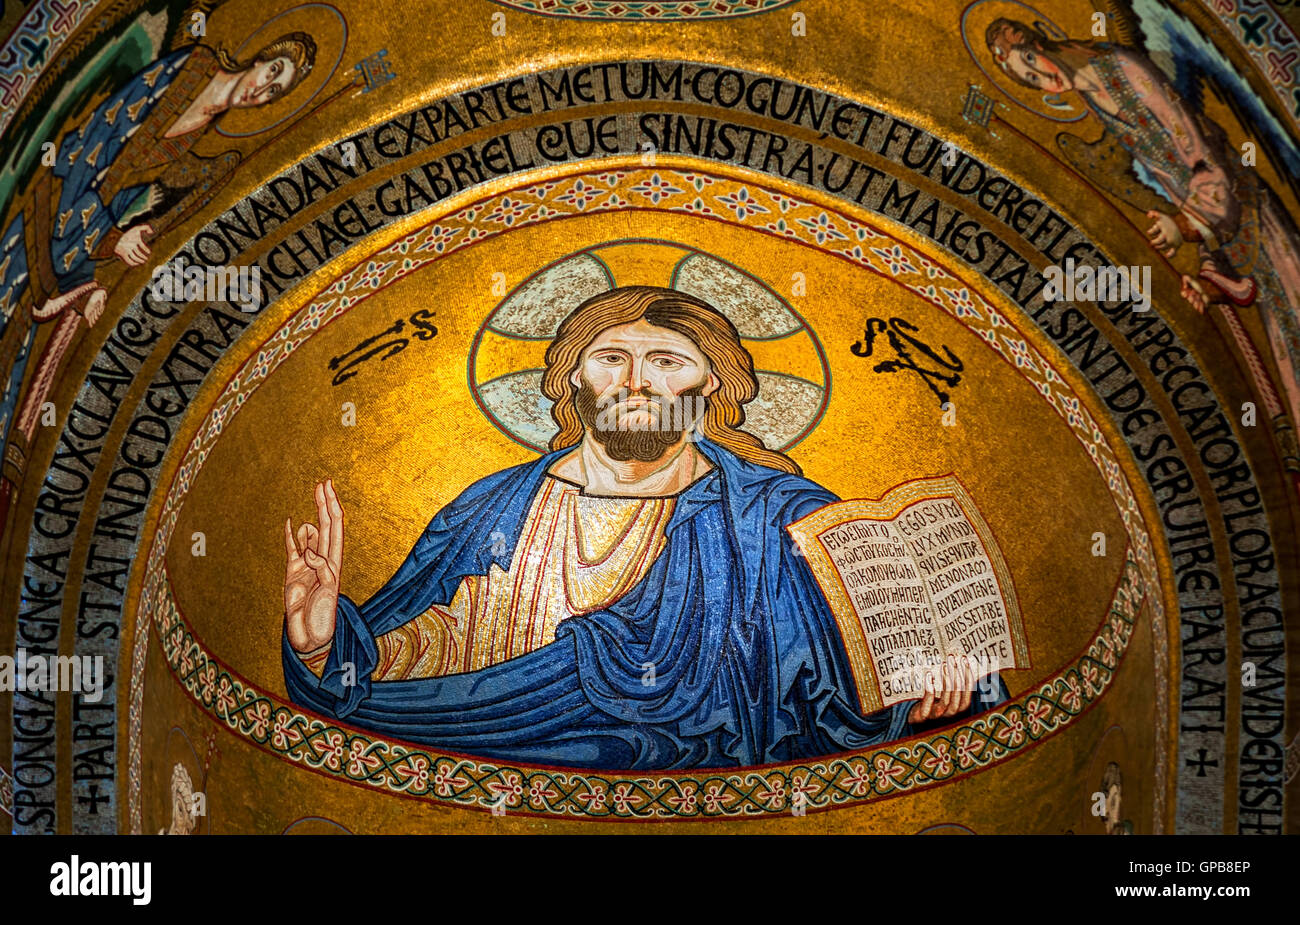 Jesus Christ mosaic icon in Monrelae cathedral, Palermo, Sicily, Italy Stock Photo